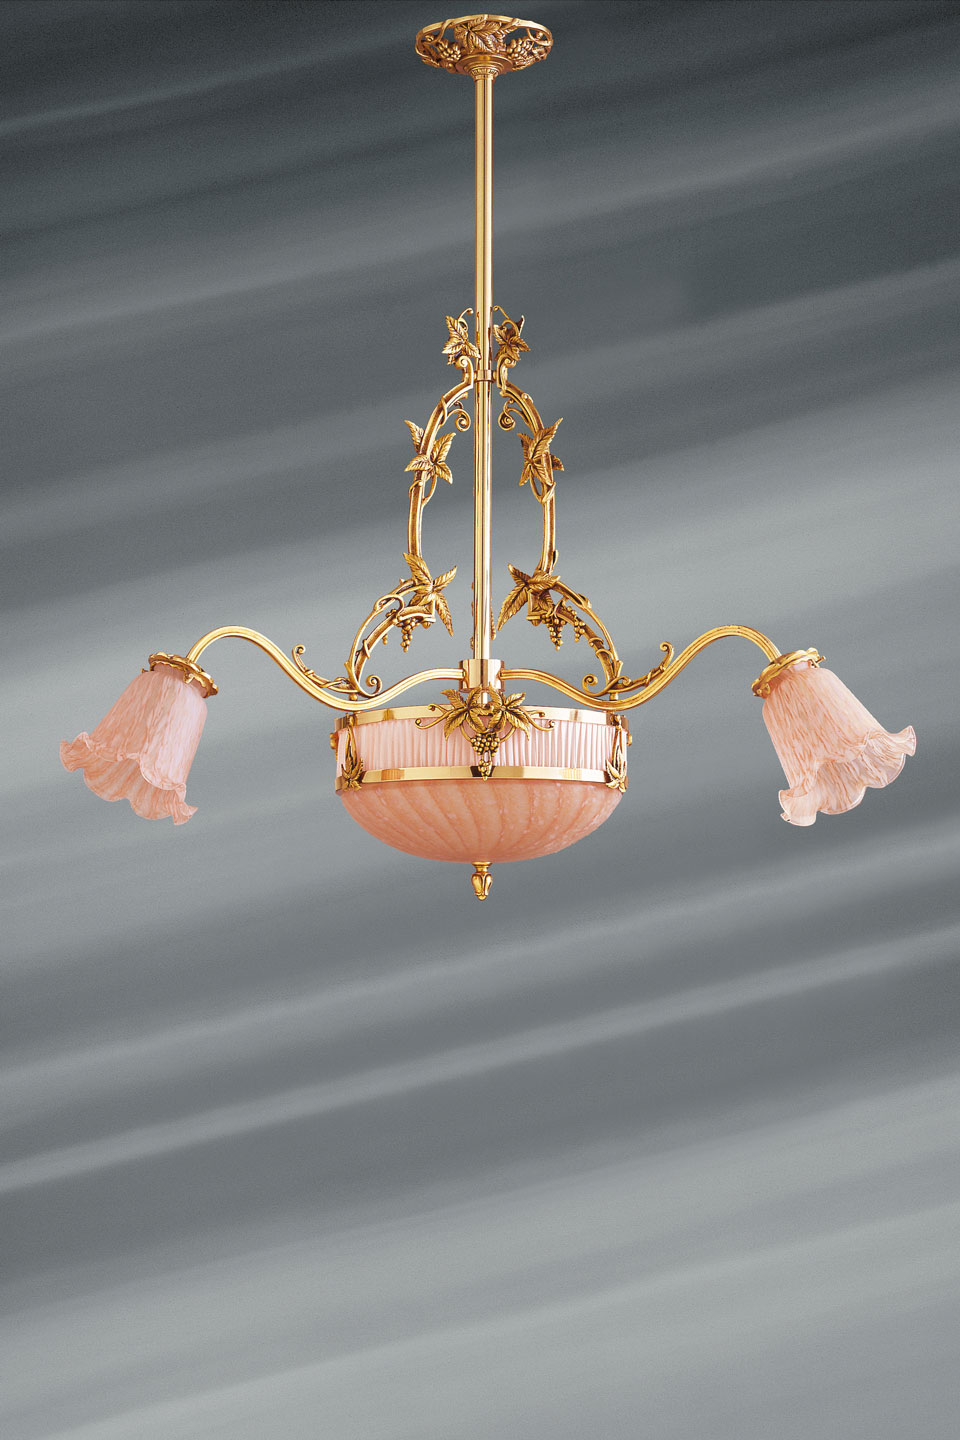 Romantic pink chandelier with 6 golden lights in glass paste. Lucien Gau. 